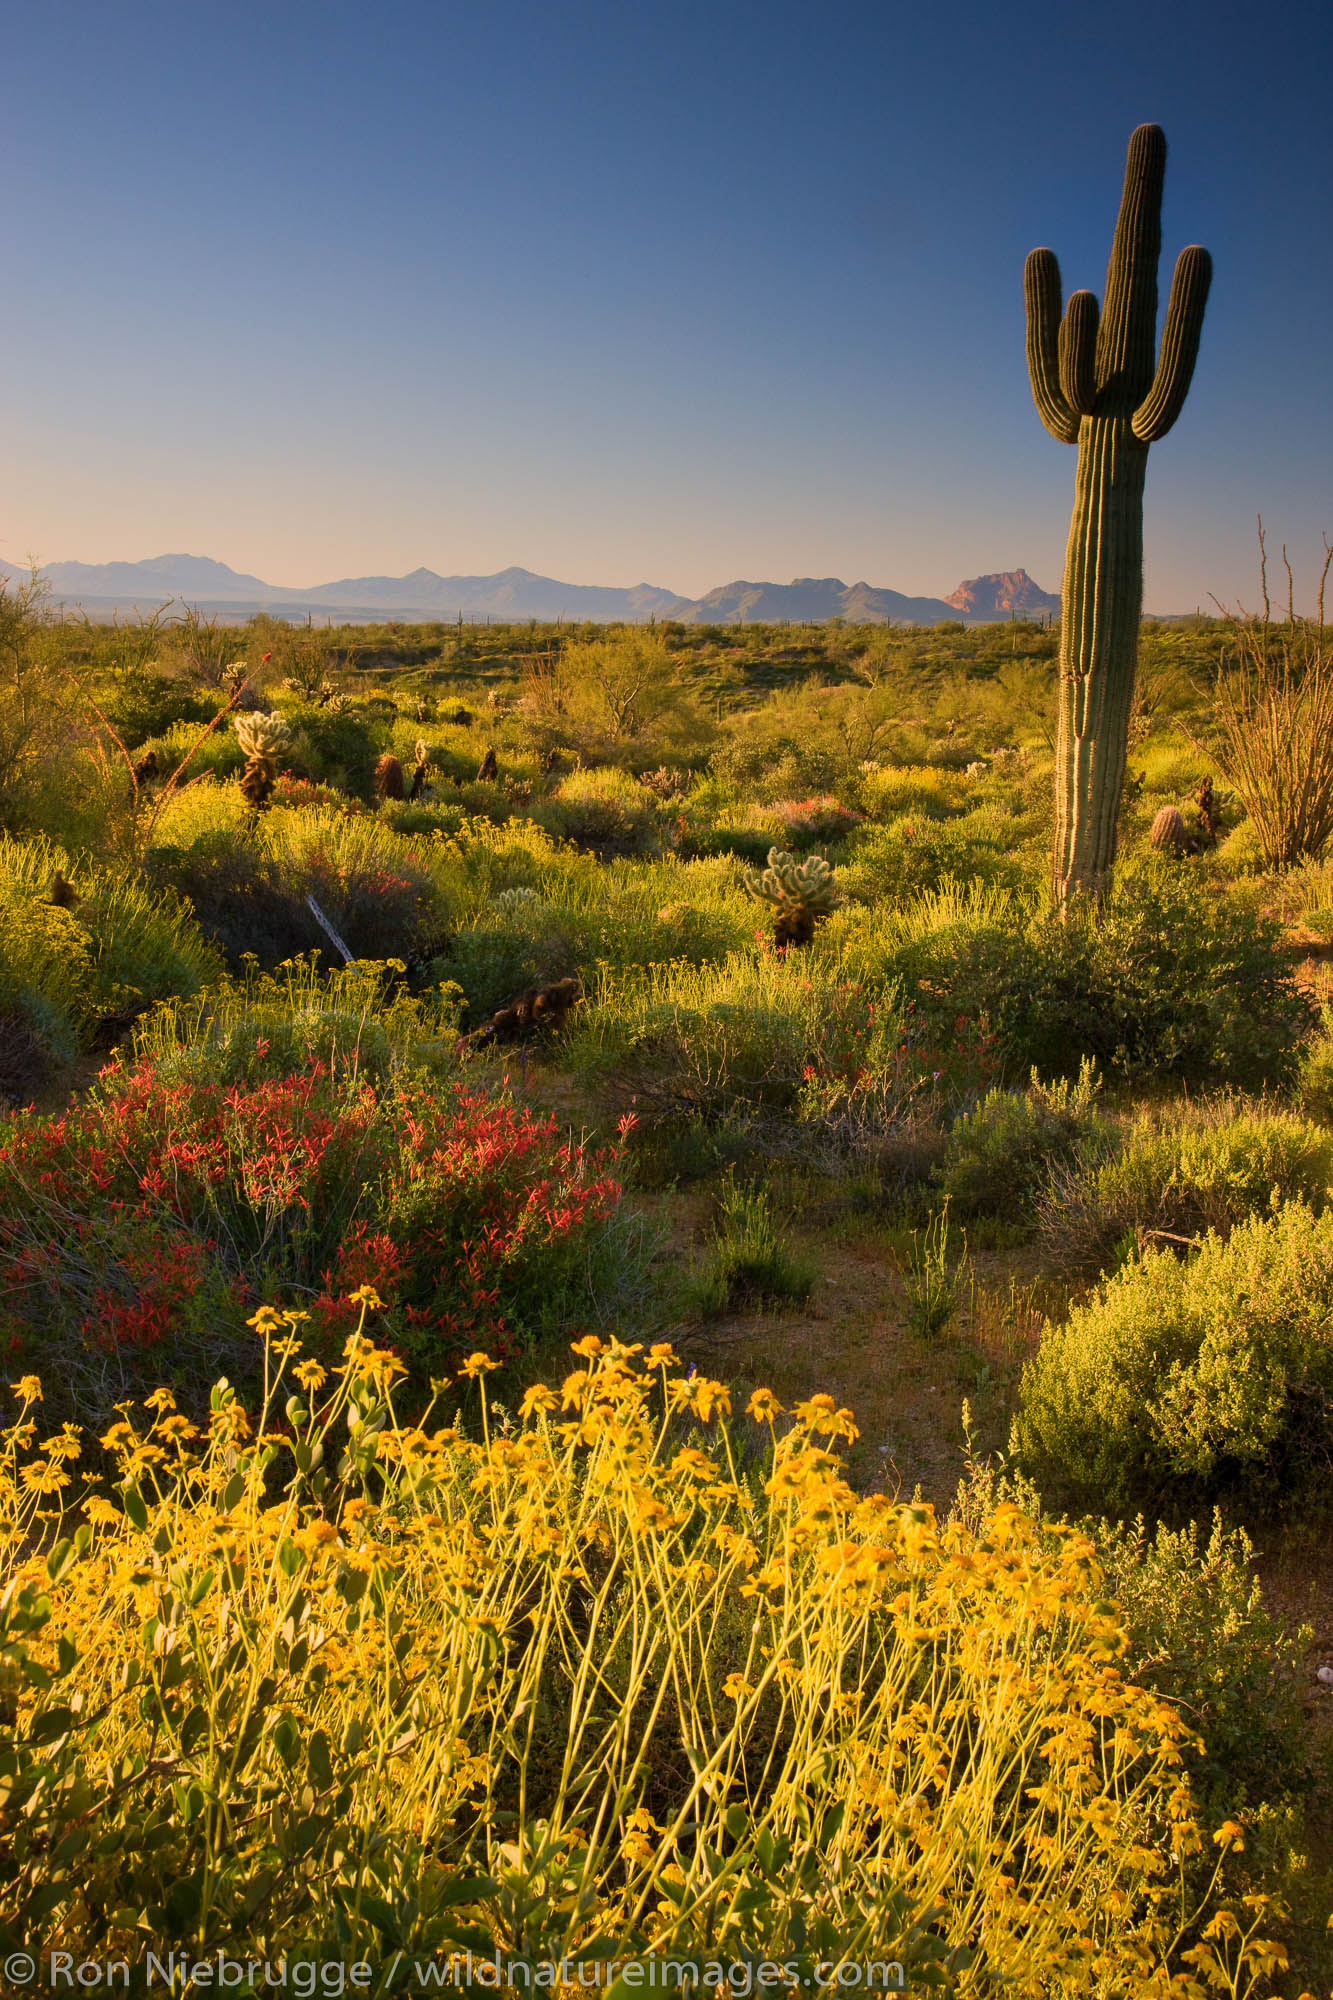 Wildflowers and cactus at McDowell Mountain Regional Park, near Fountain Hills, outside of Phoenix, Arizona.